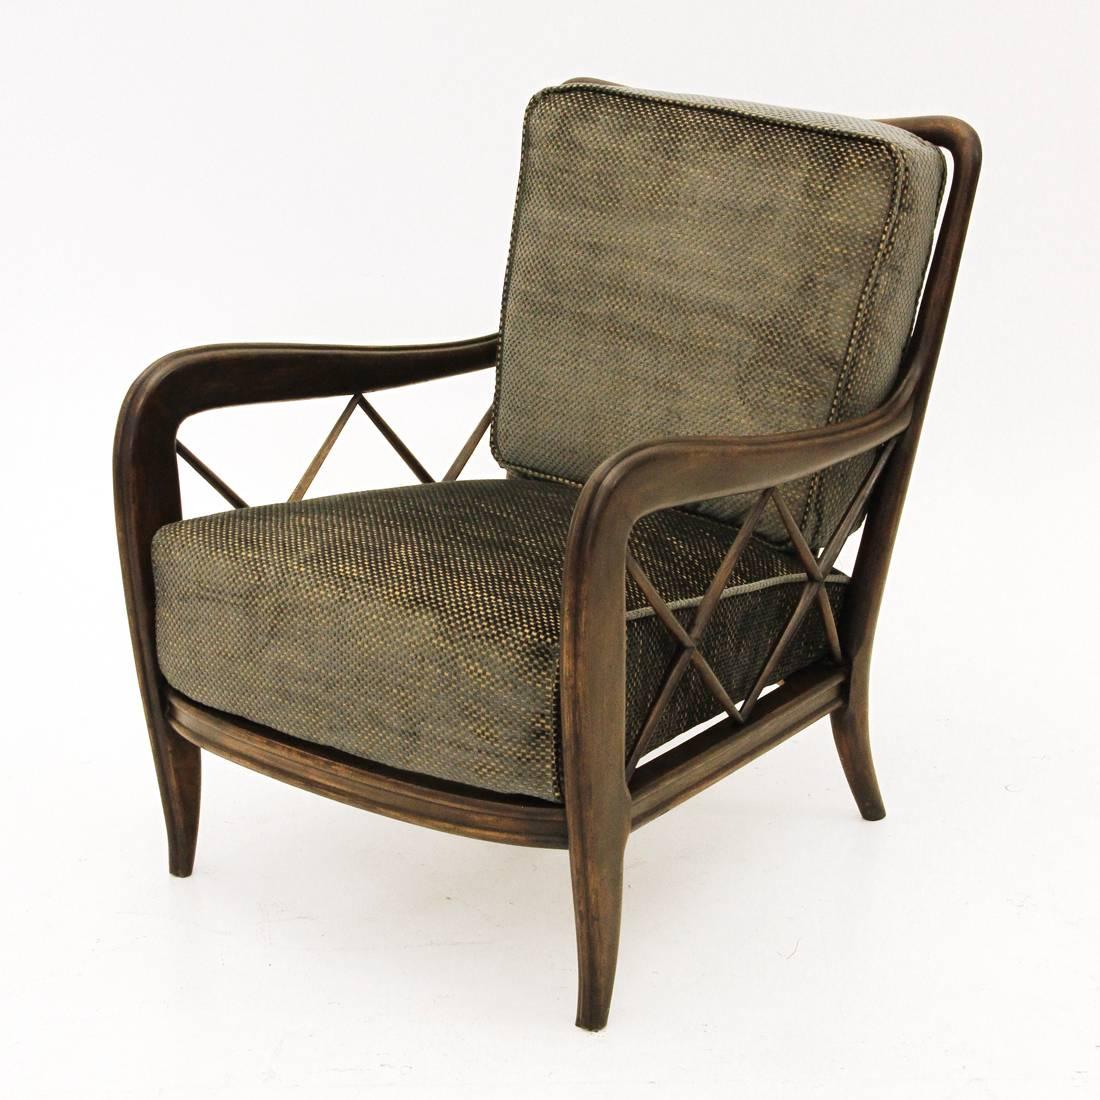 Italian armchair designed by Paolo Buffa in the 1940s. Features a wooden structure, and padded cushions covered in velvet.